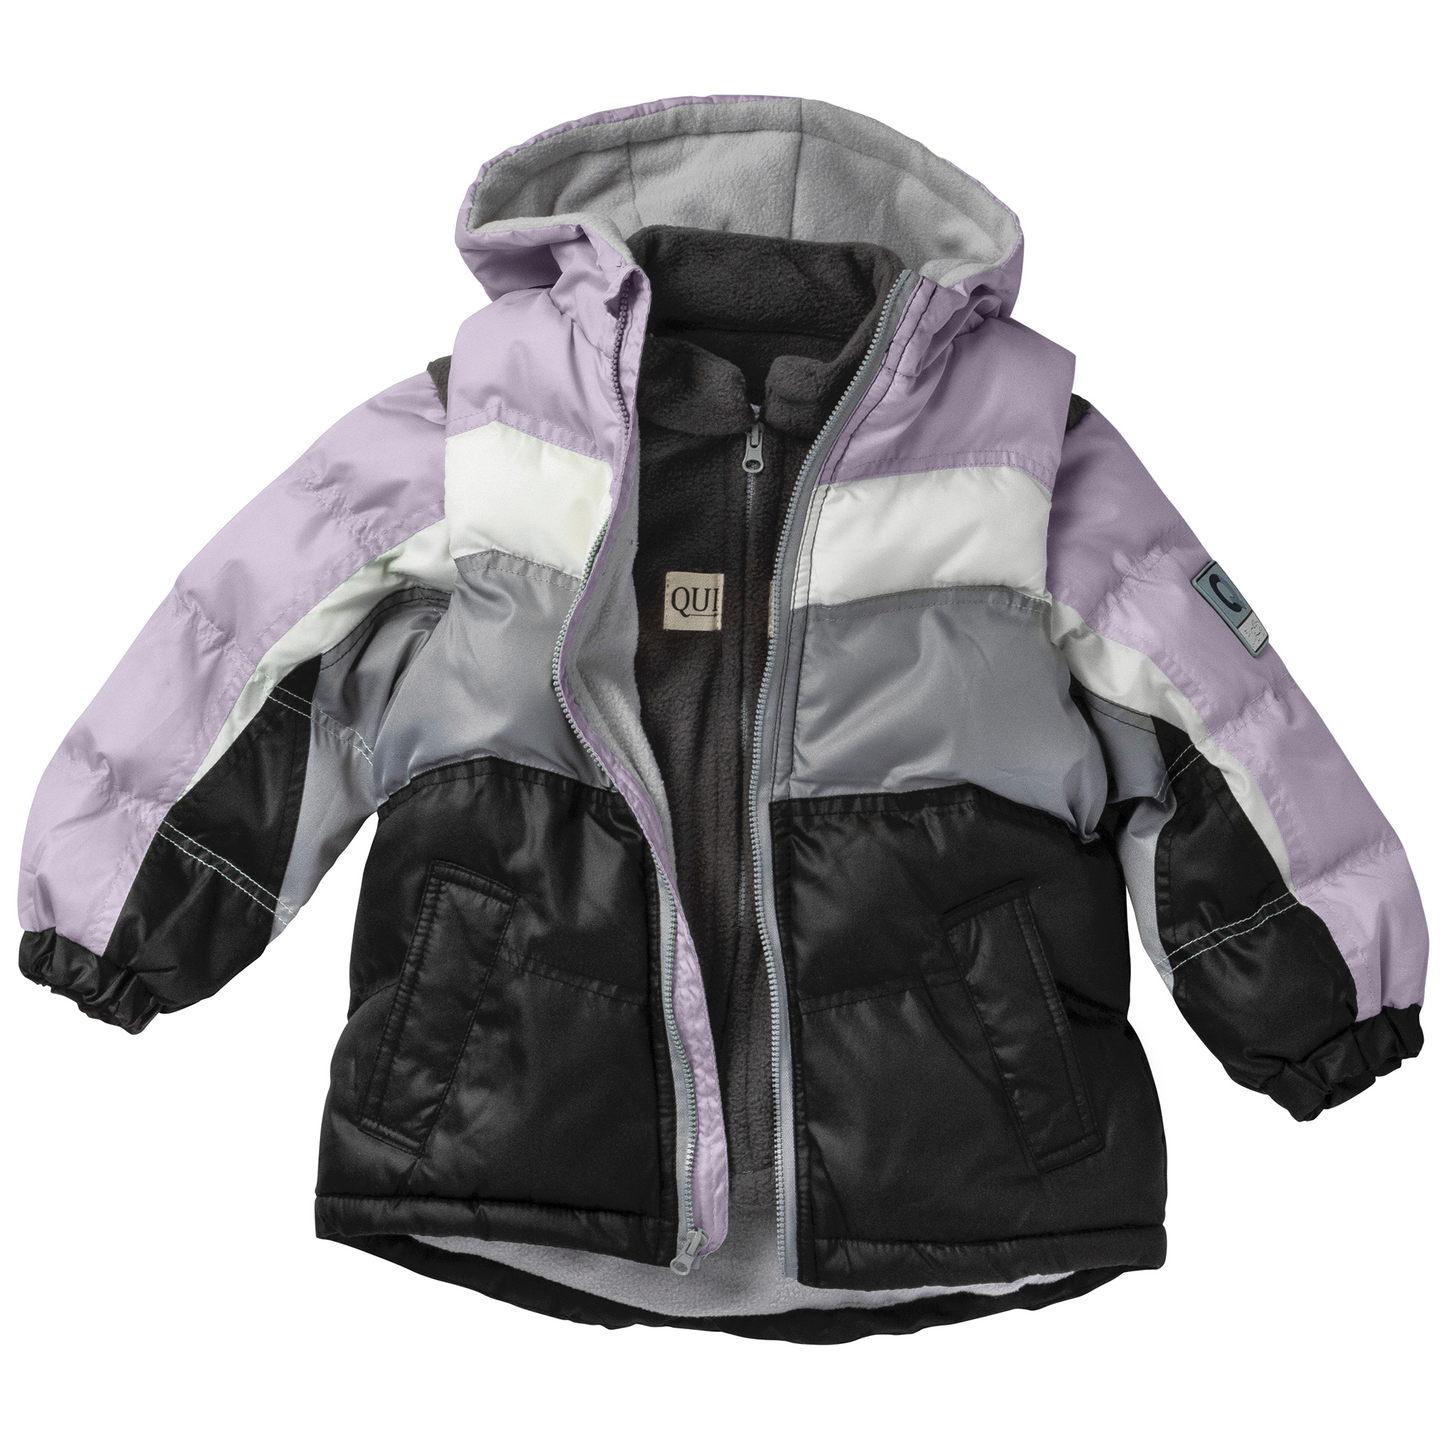 Quimby Coat - Lavender           FREE WITH THE PURCHASE OF A JARIBOOG